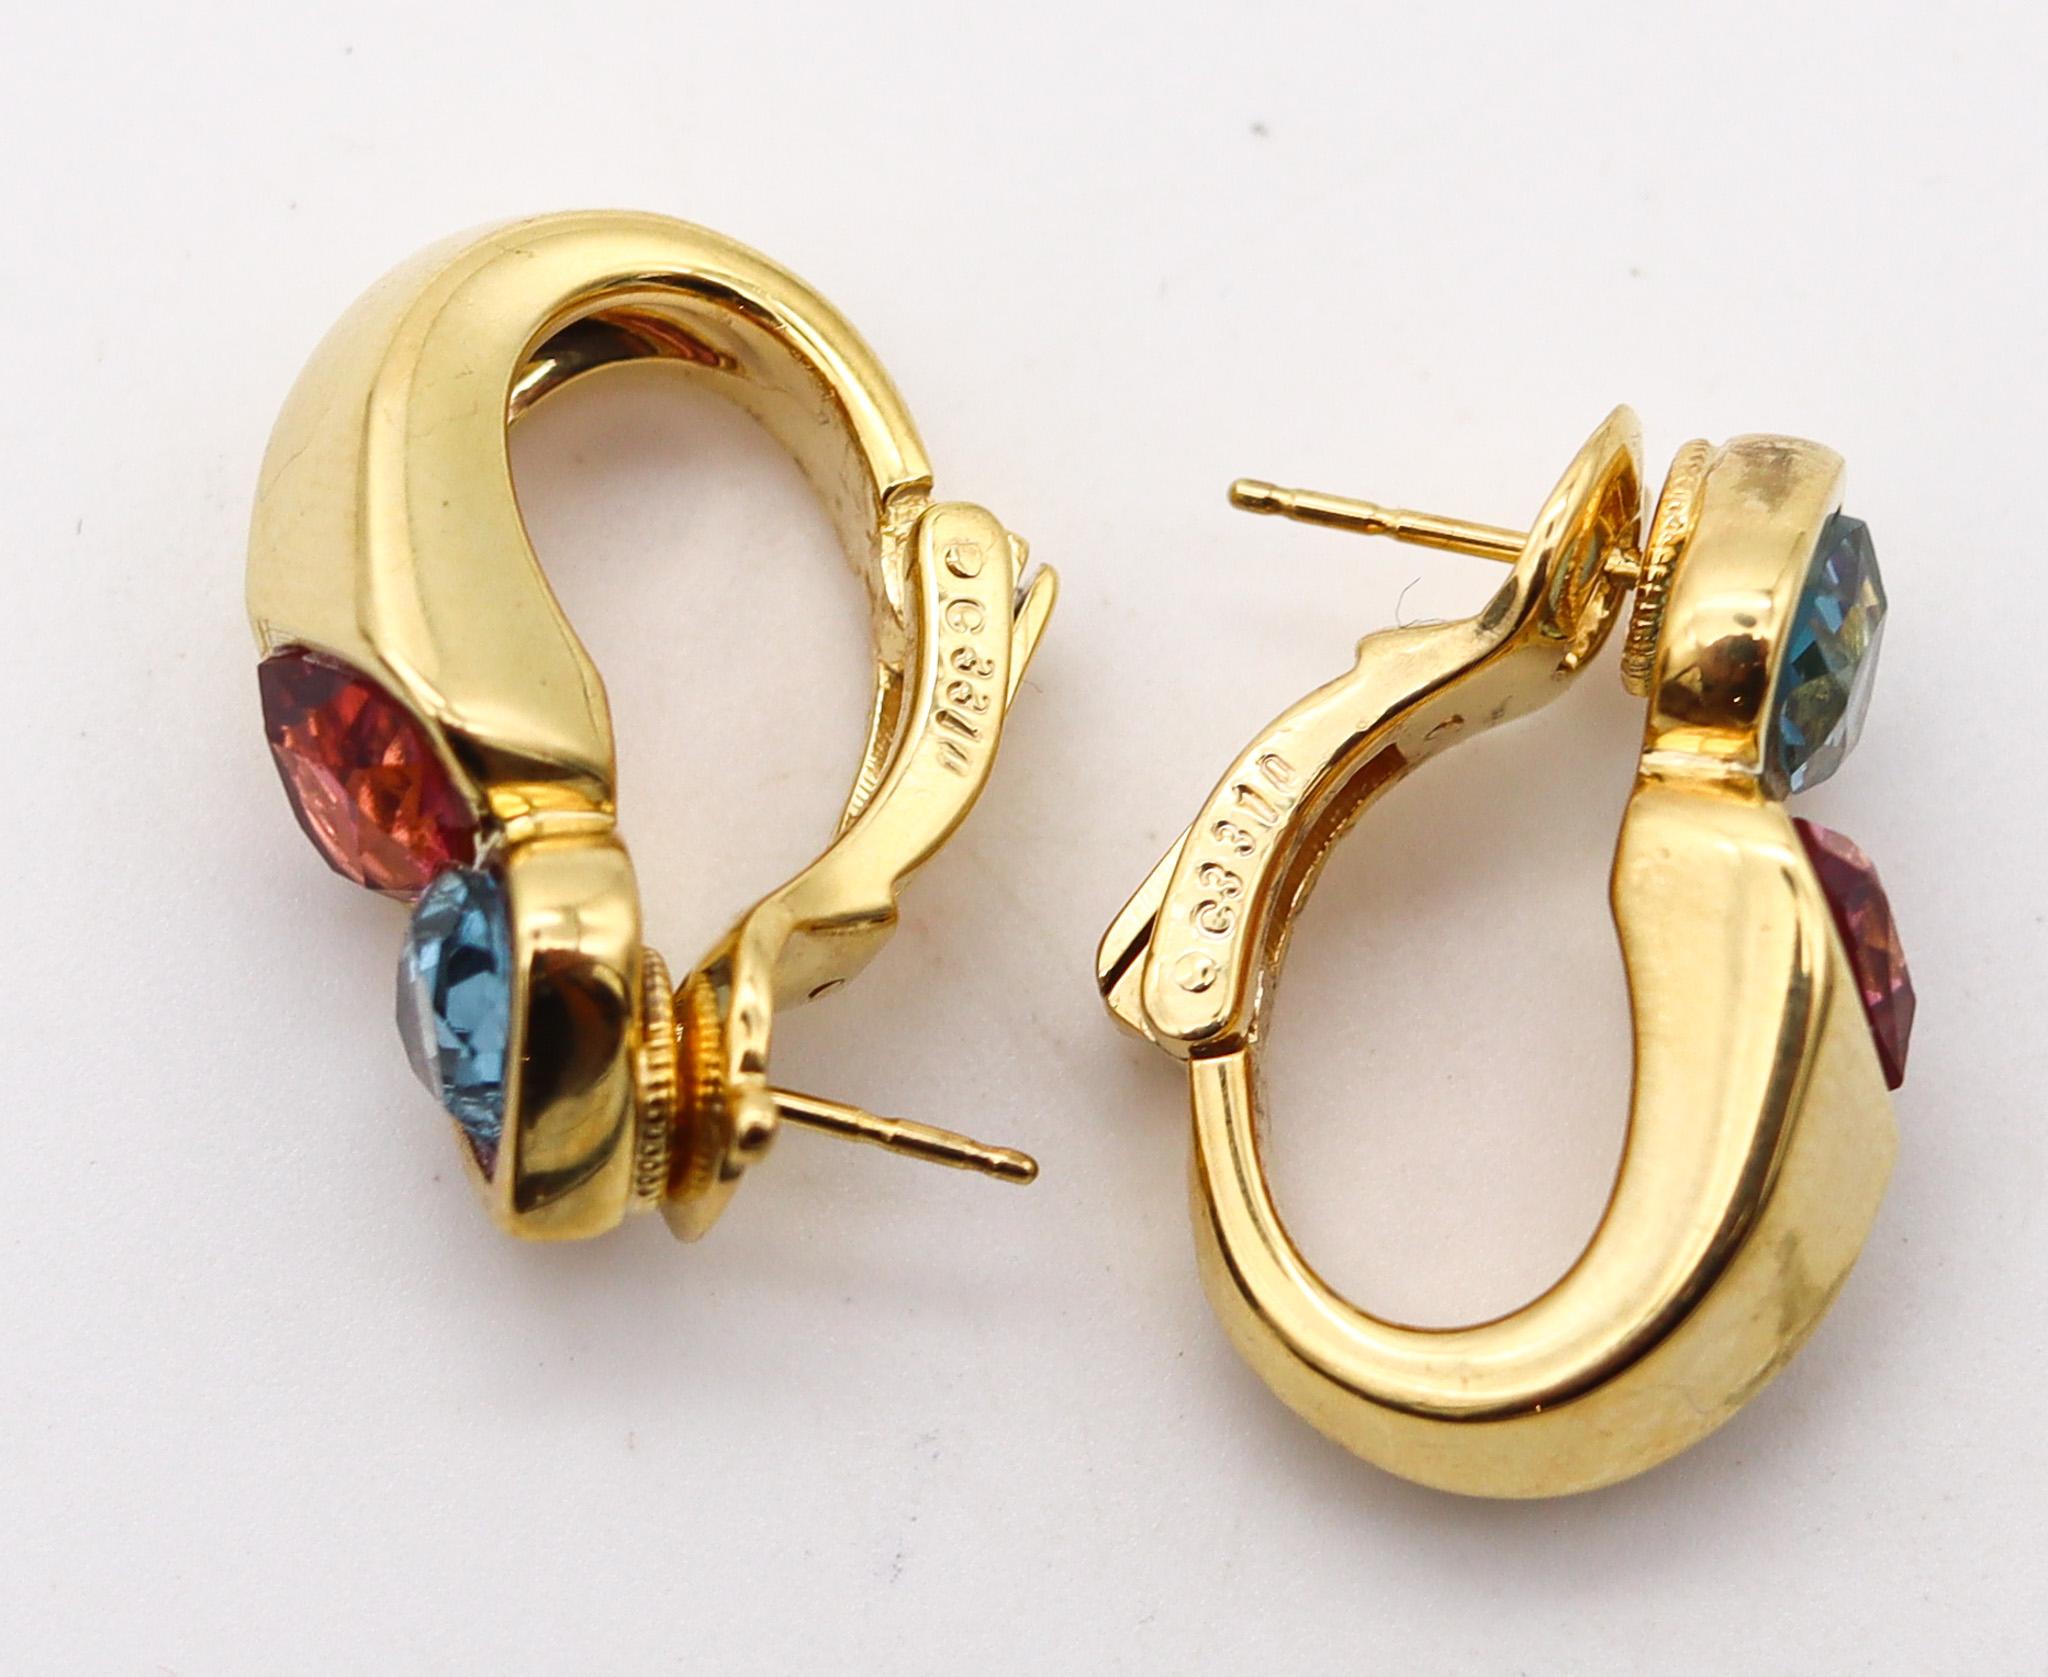 Modernist Marina B Milan Earrings In 18Kt Yellow Gold With 5.58 Ctw Tourmaline And Topaz For Sale